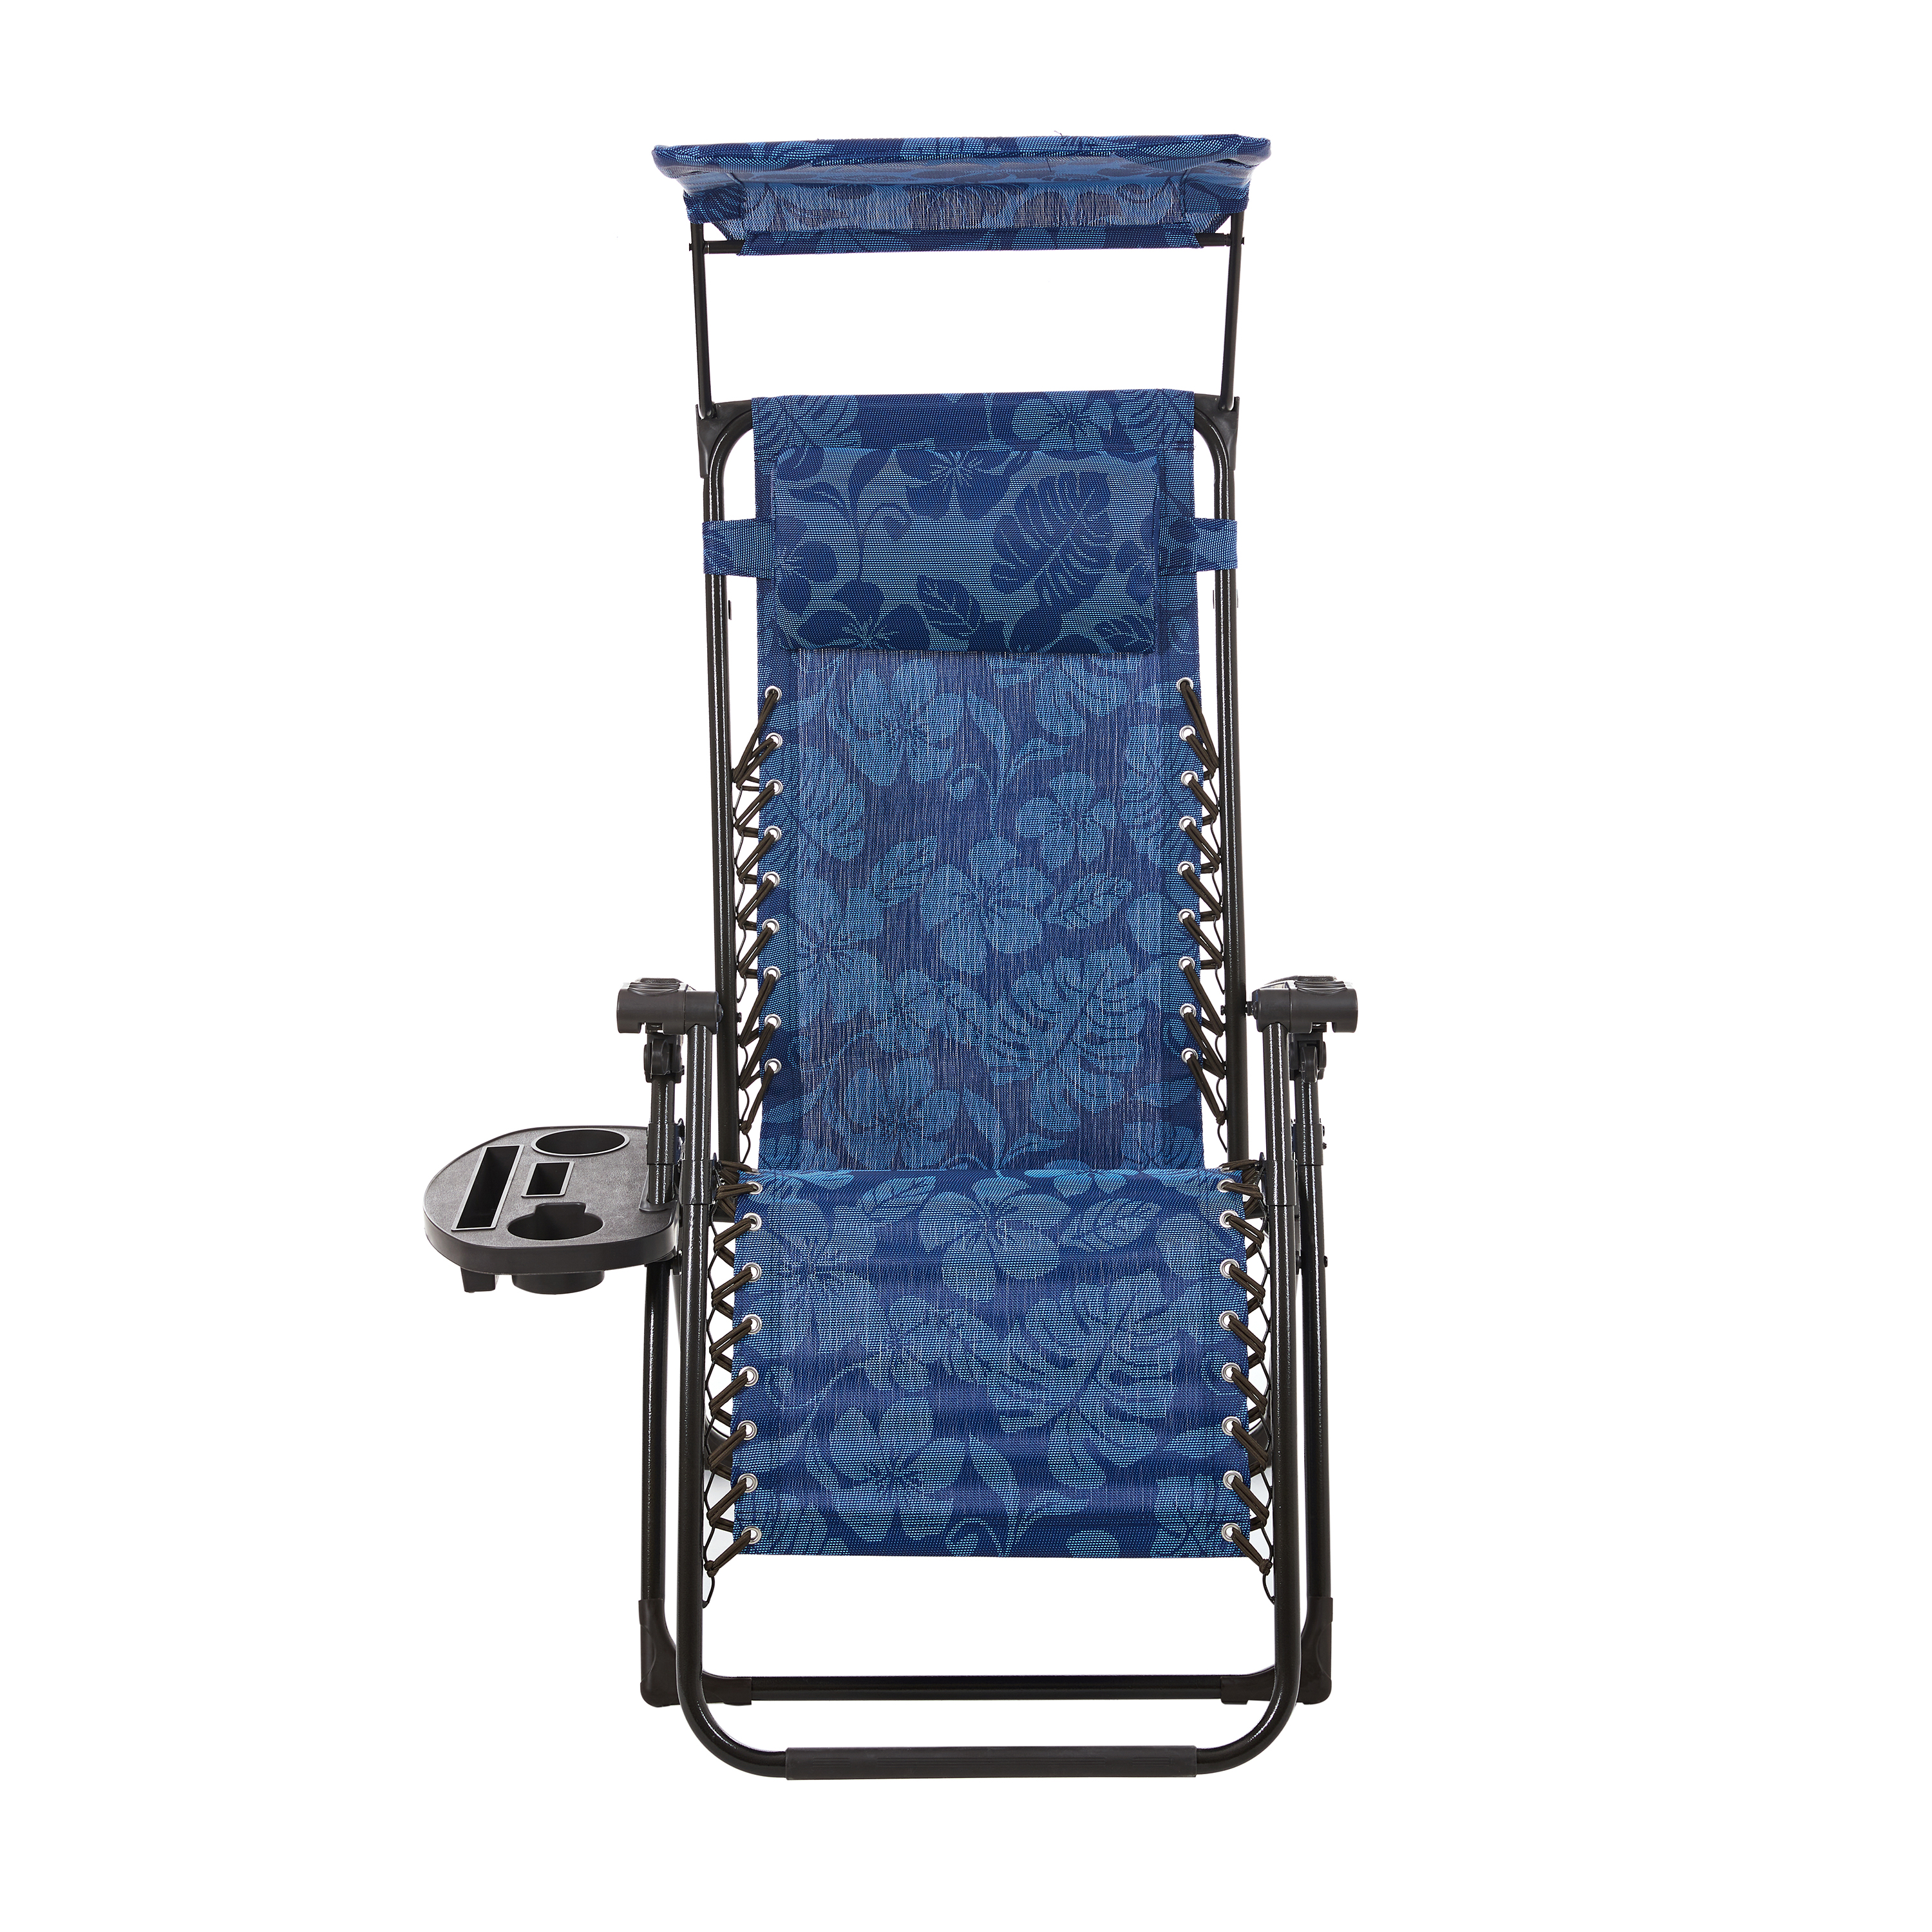 Bliss Hammocks Blue Flower 26" Wide Zero Gravity Chair w/ Adjustable Canopy, Drink Tray & Pillow, 300 Lb. Capacity - image 10 of 13